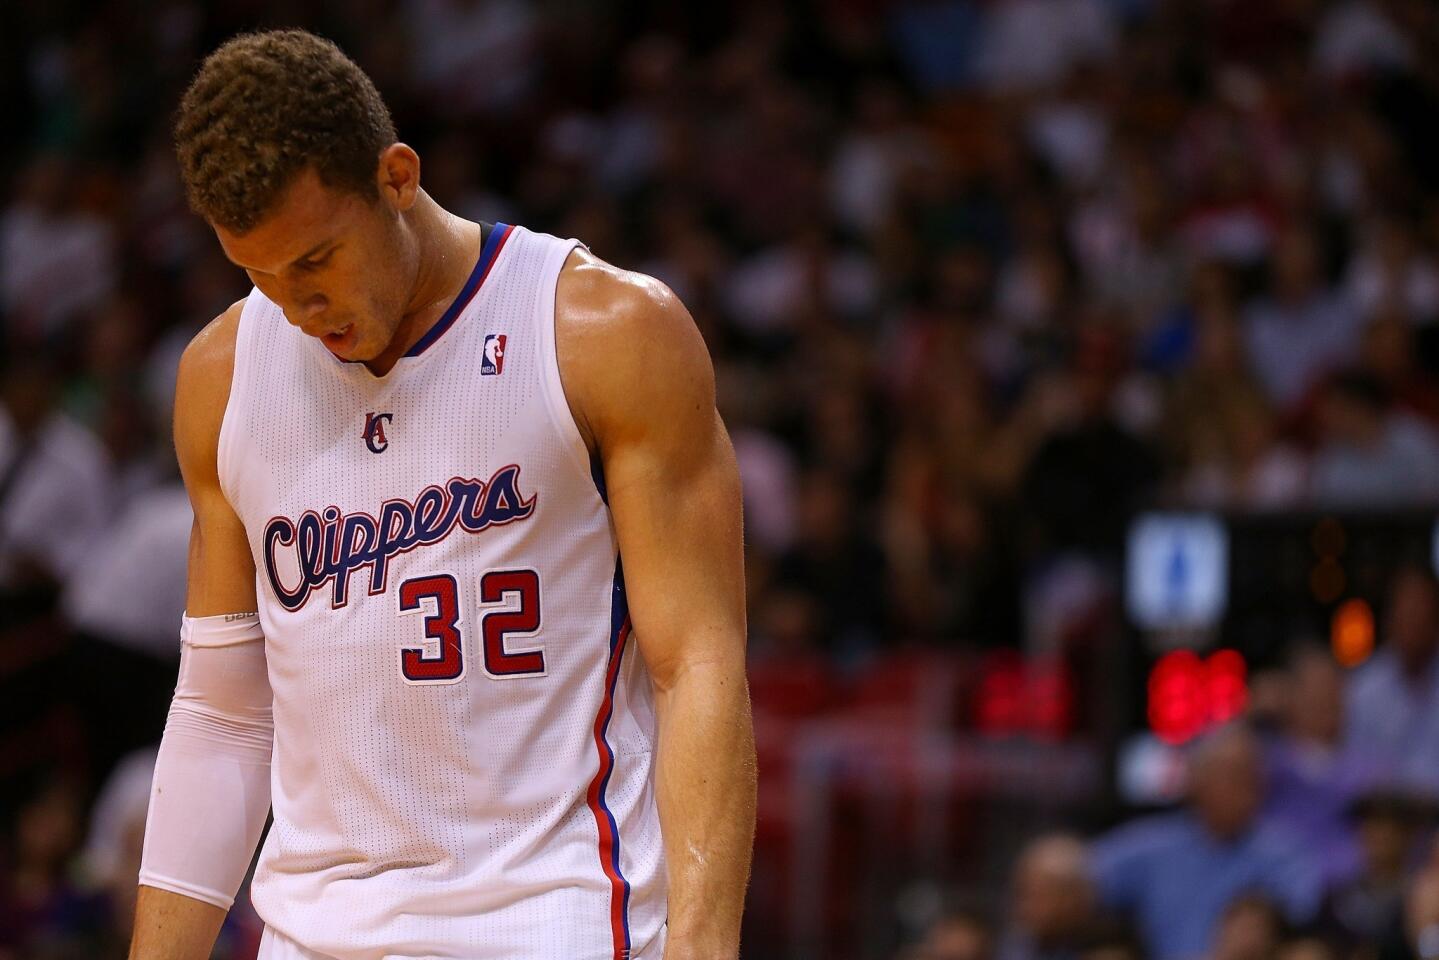 Power forward Blake Griffin reflects which side of the rout the Clippers are on Friday night in Miami.